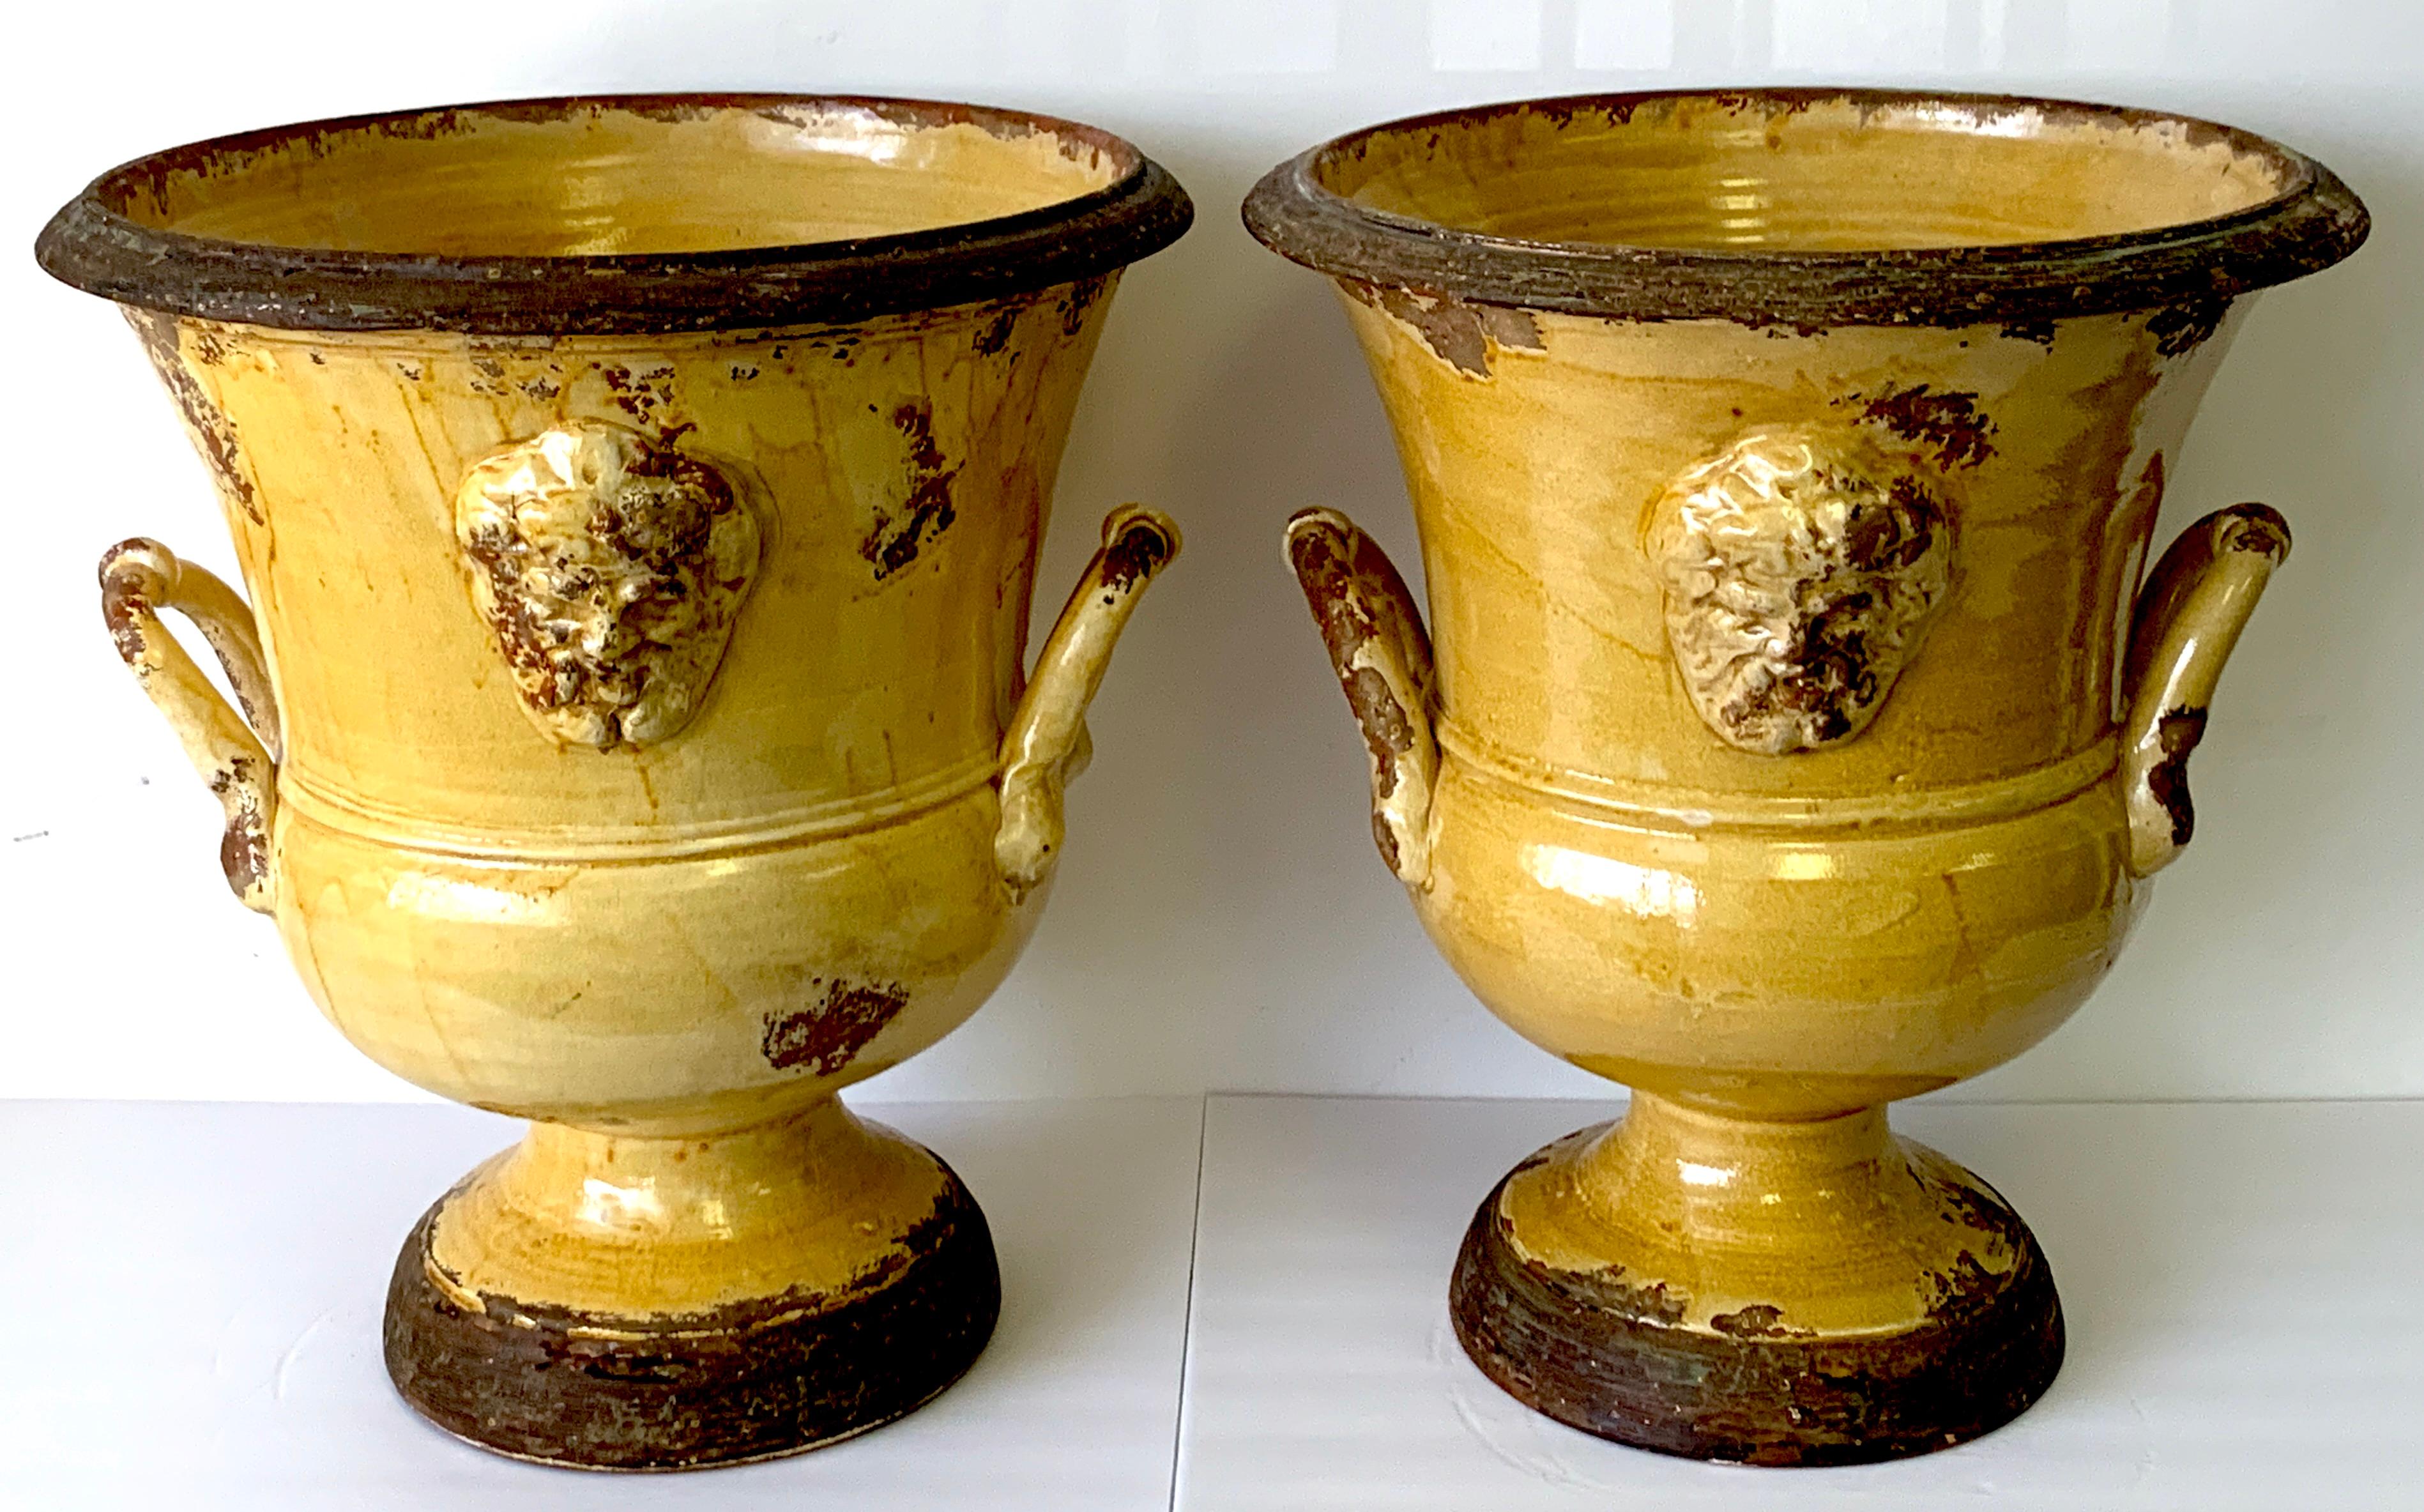 Exceptional pair of Italian Anduze / yellow glazed terracotta medallion urns
Each one of campana form with medallion front and backs, and twin applied handles. Beautiful inconsistent glaze, ready to place indoors or outside.
The diameter of the base